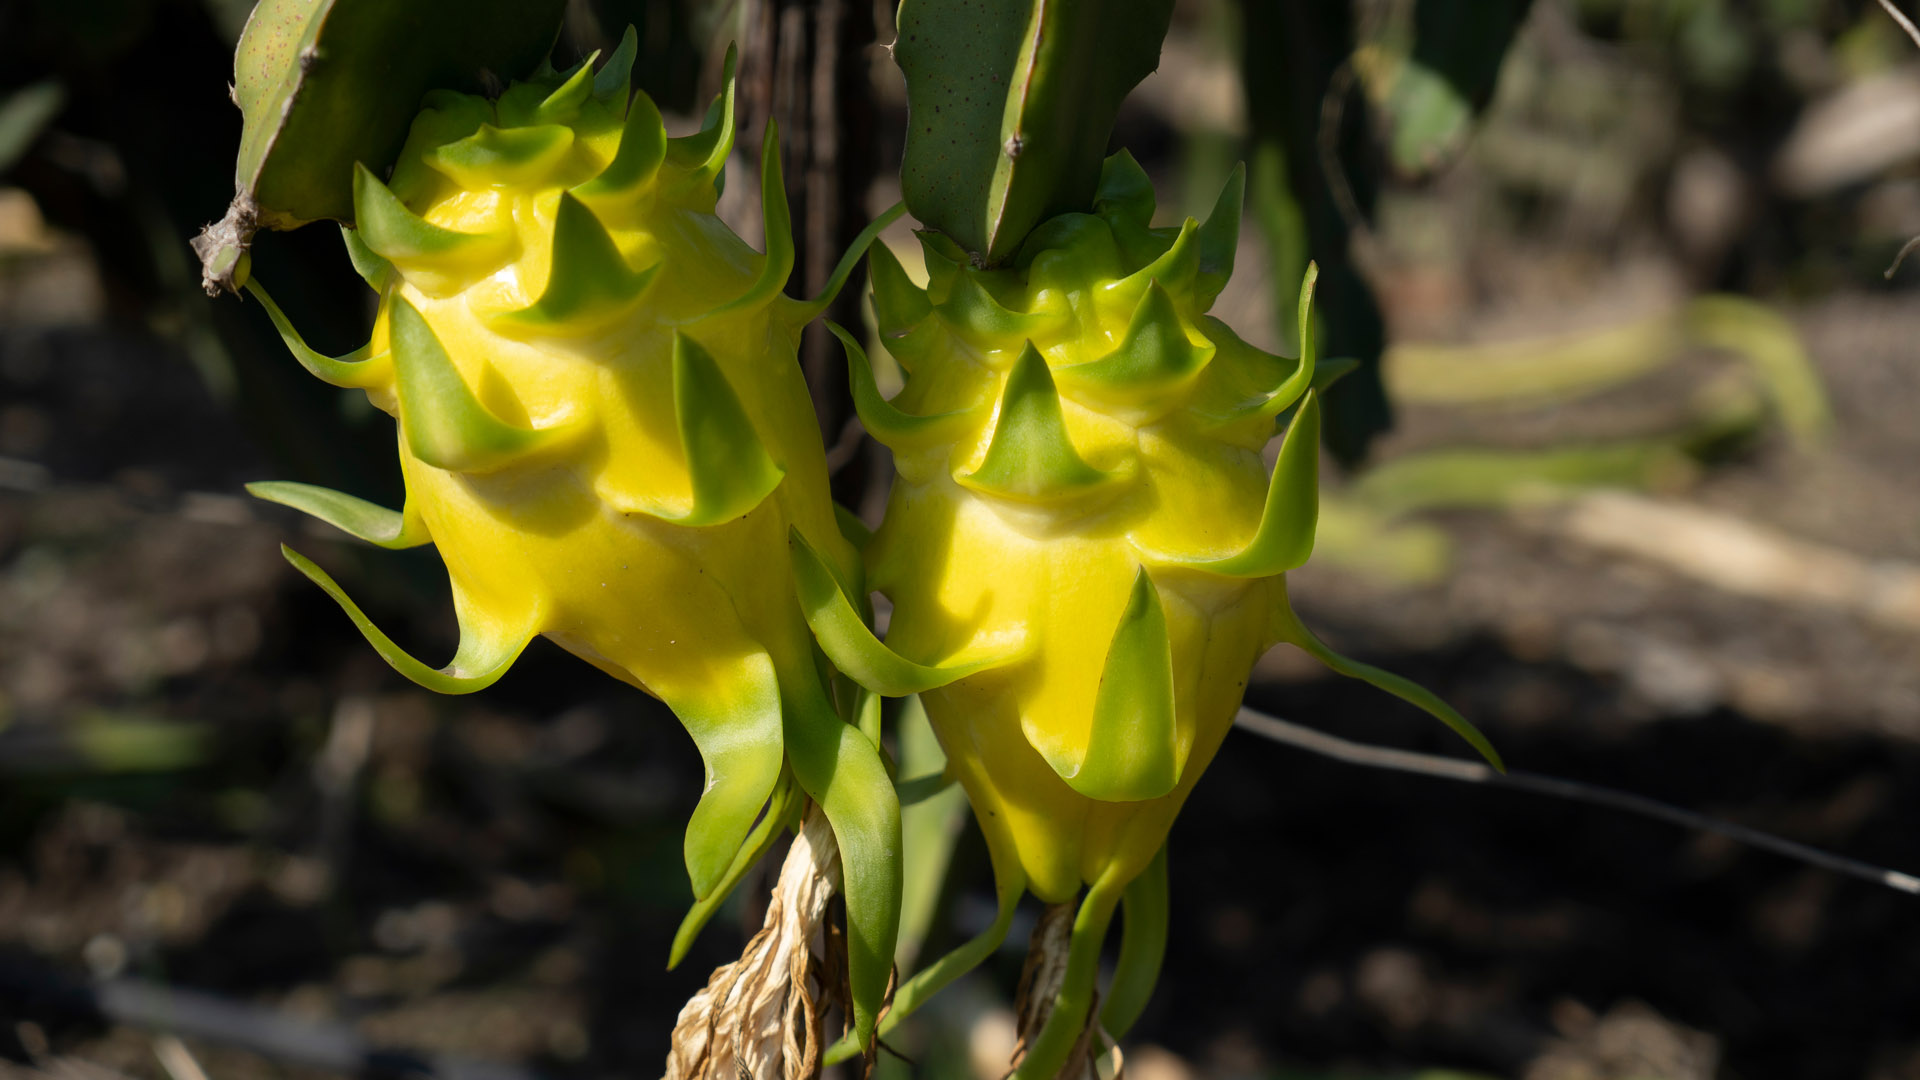 yellow dragon fruit on a branch in an orchard